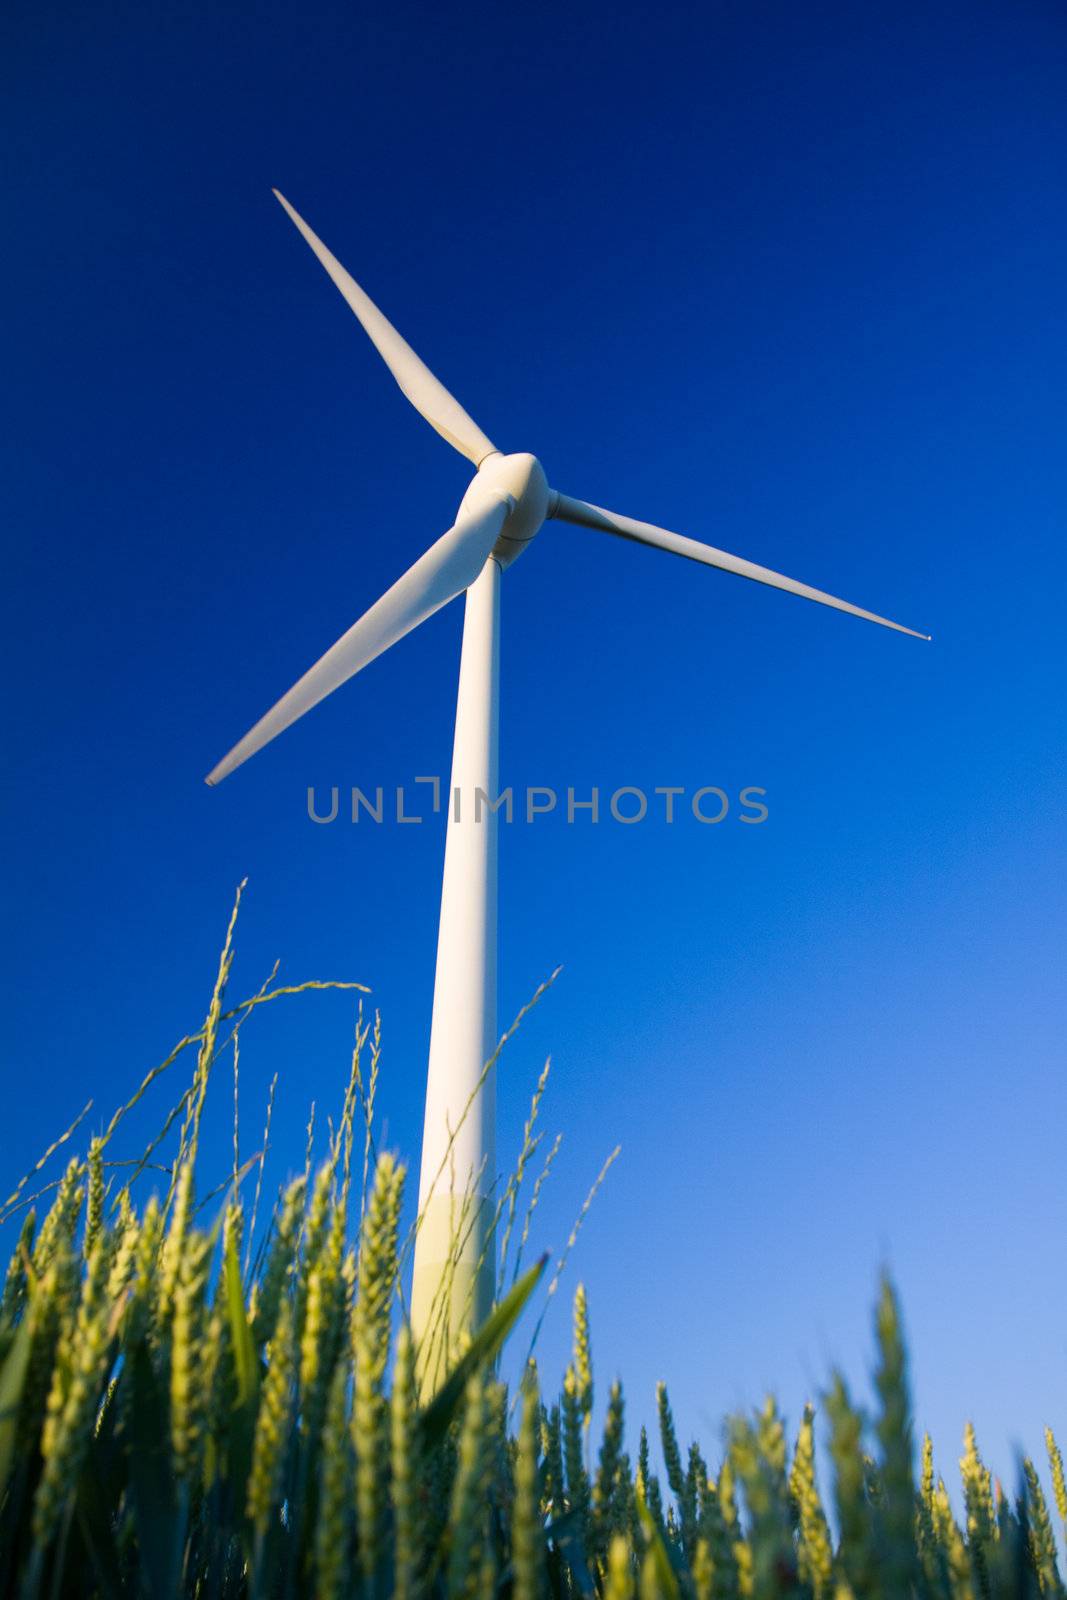 Windmill in a field of crop with blue sky